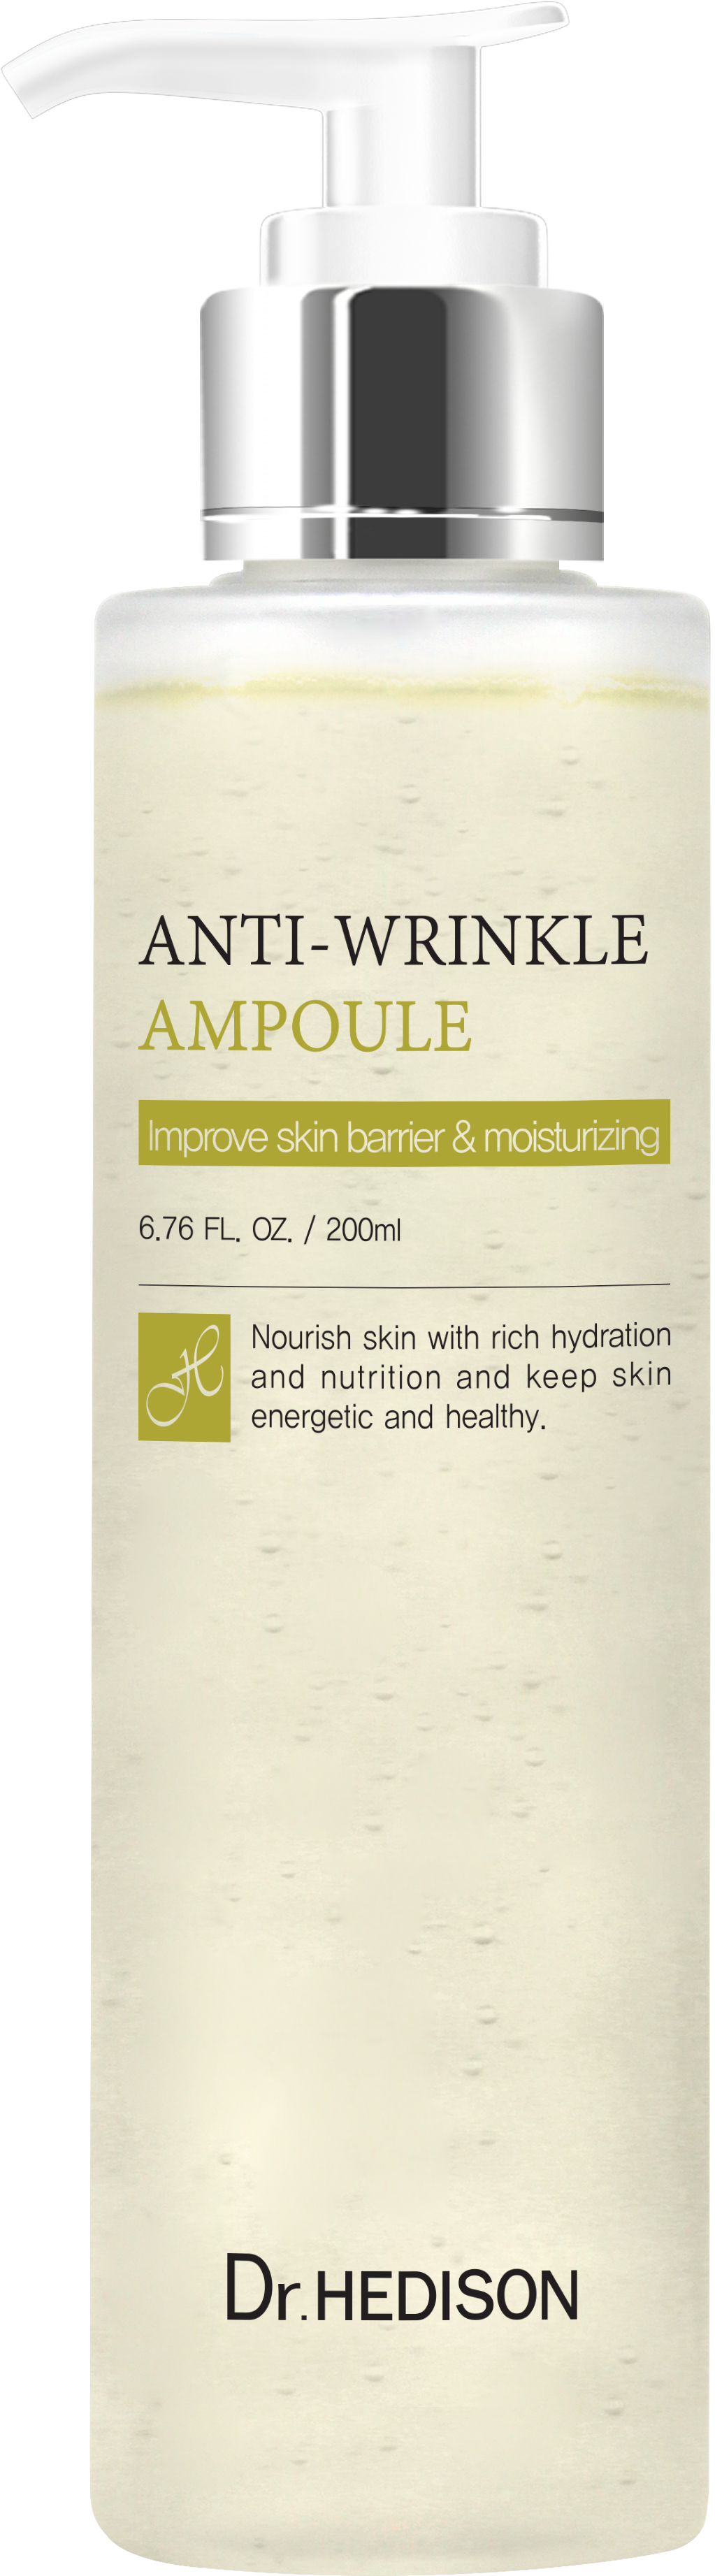 Dr. Hedison Anti-Wrinkle Ampoule (200ml)